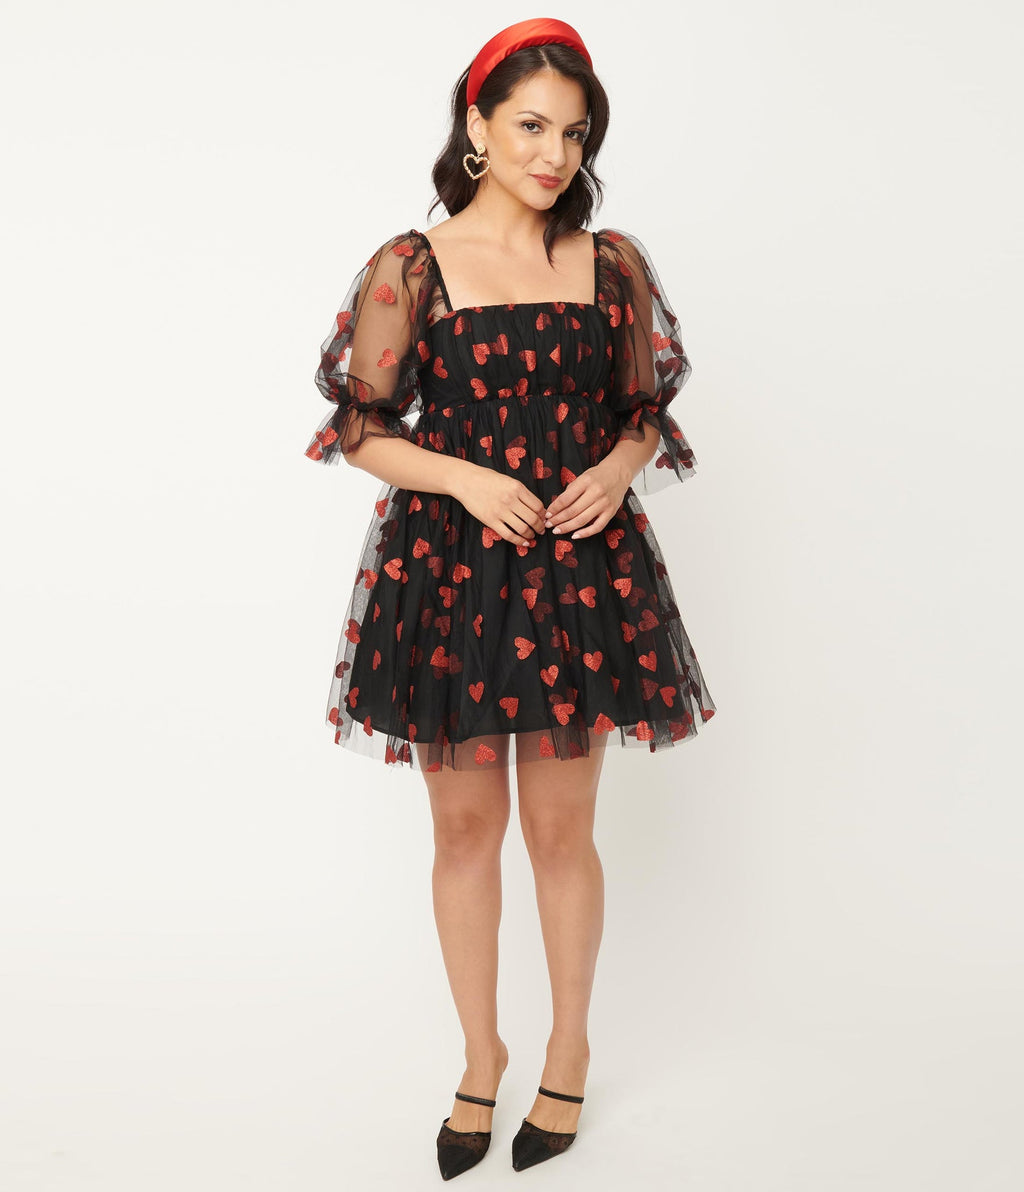 Smak Parlour Black & Red Glitter Hearts Love Interest Babydoll Dress (XS, S and M ONLY)